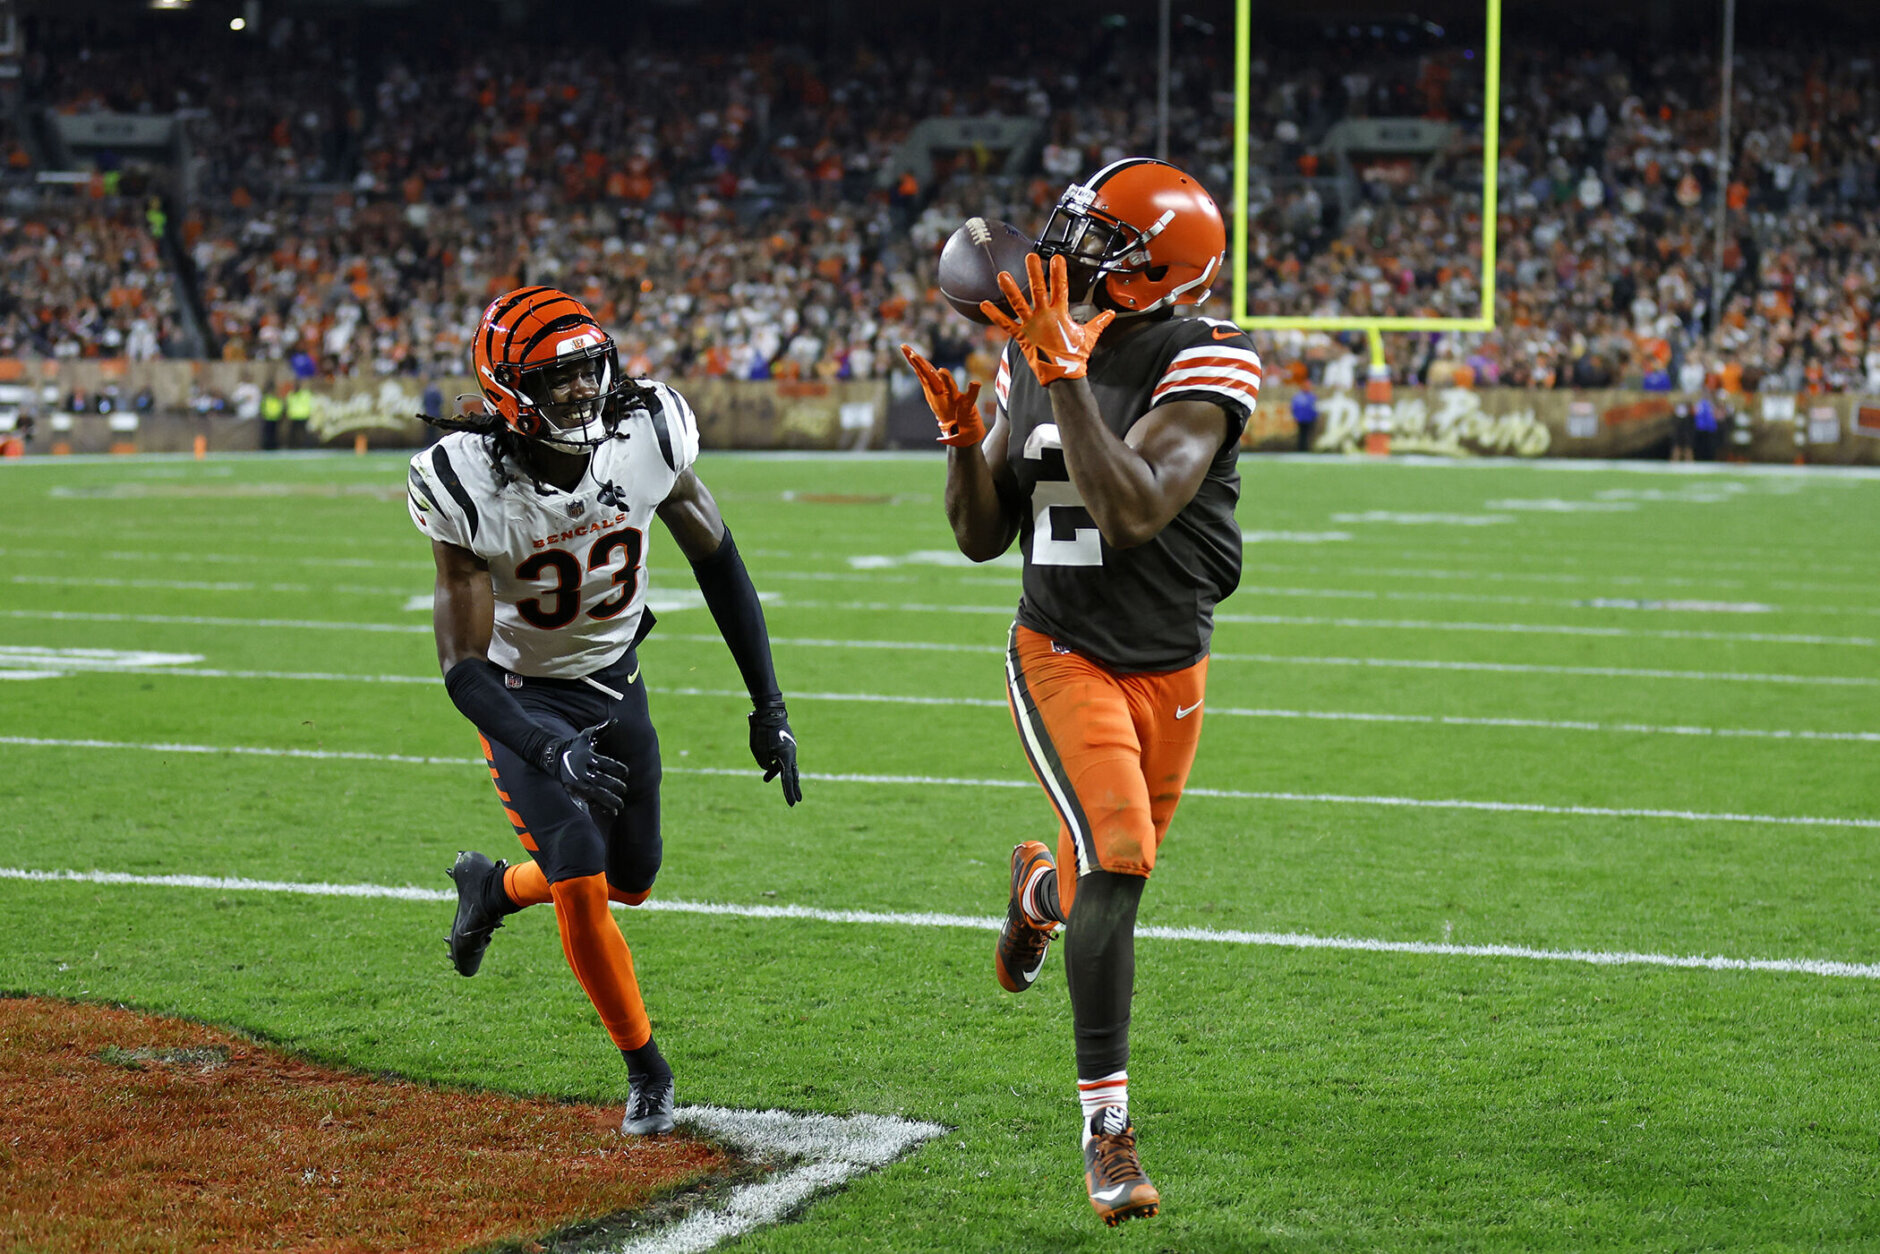 <p><em><strong>Bengals 13</strong></em><br />
<em><strong>Browns 32</strong></em></p>
<p>This eyesore now means Cincinnati has an NFL-record 13 straight road primetime losses and has dropped their last five games to rival Cleveland. Why, other than the Bengals having the most Halloween-looking uniforms, would this lousy matchup be scheduled for a Monday night?</p>
